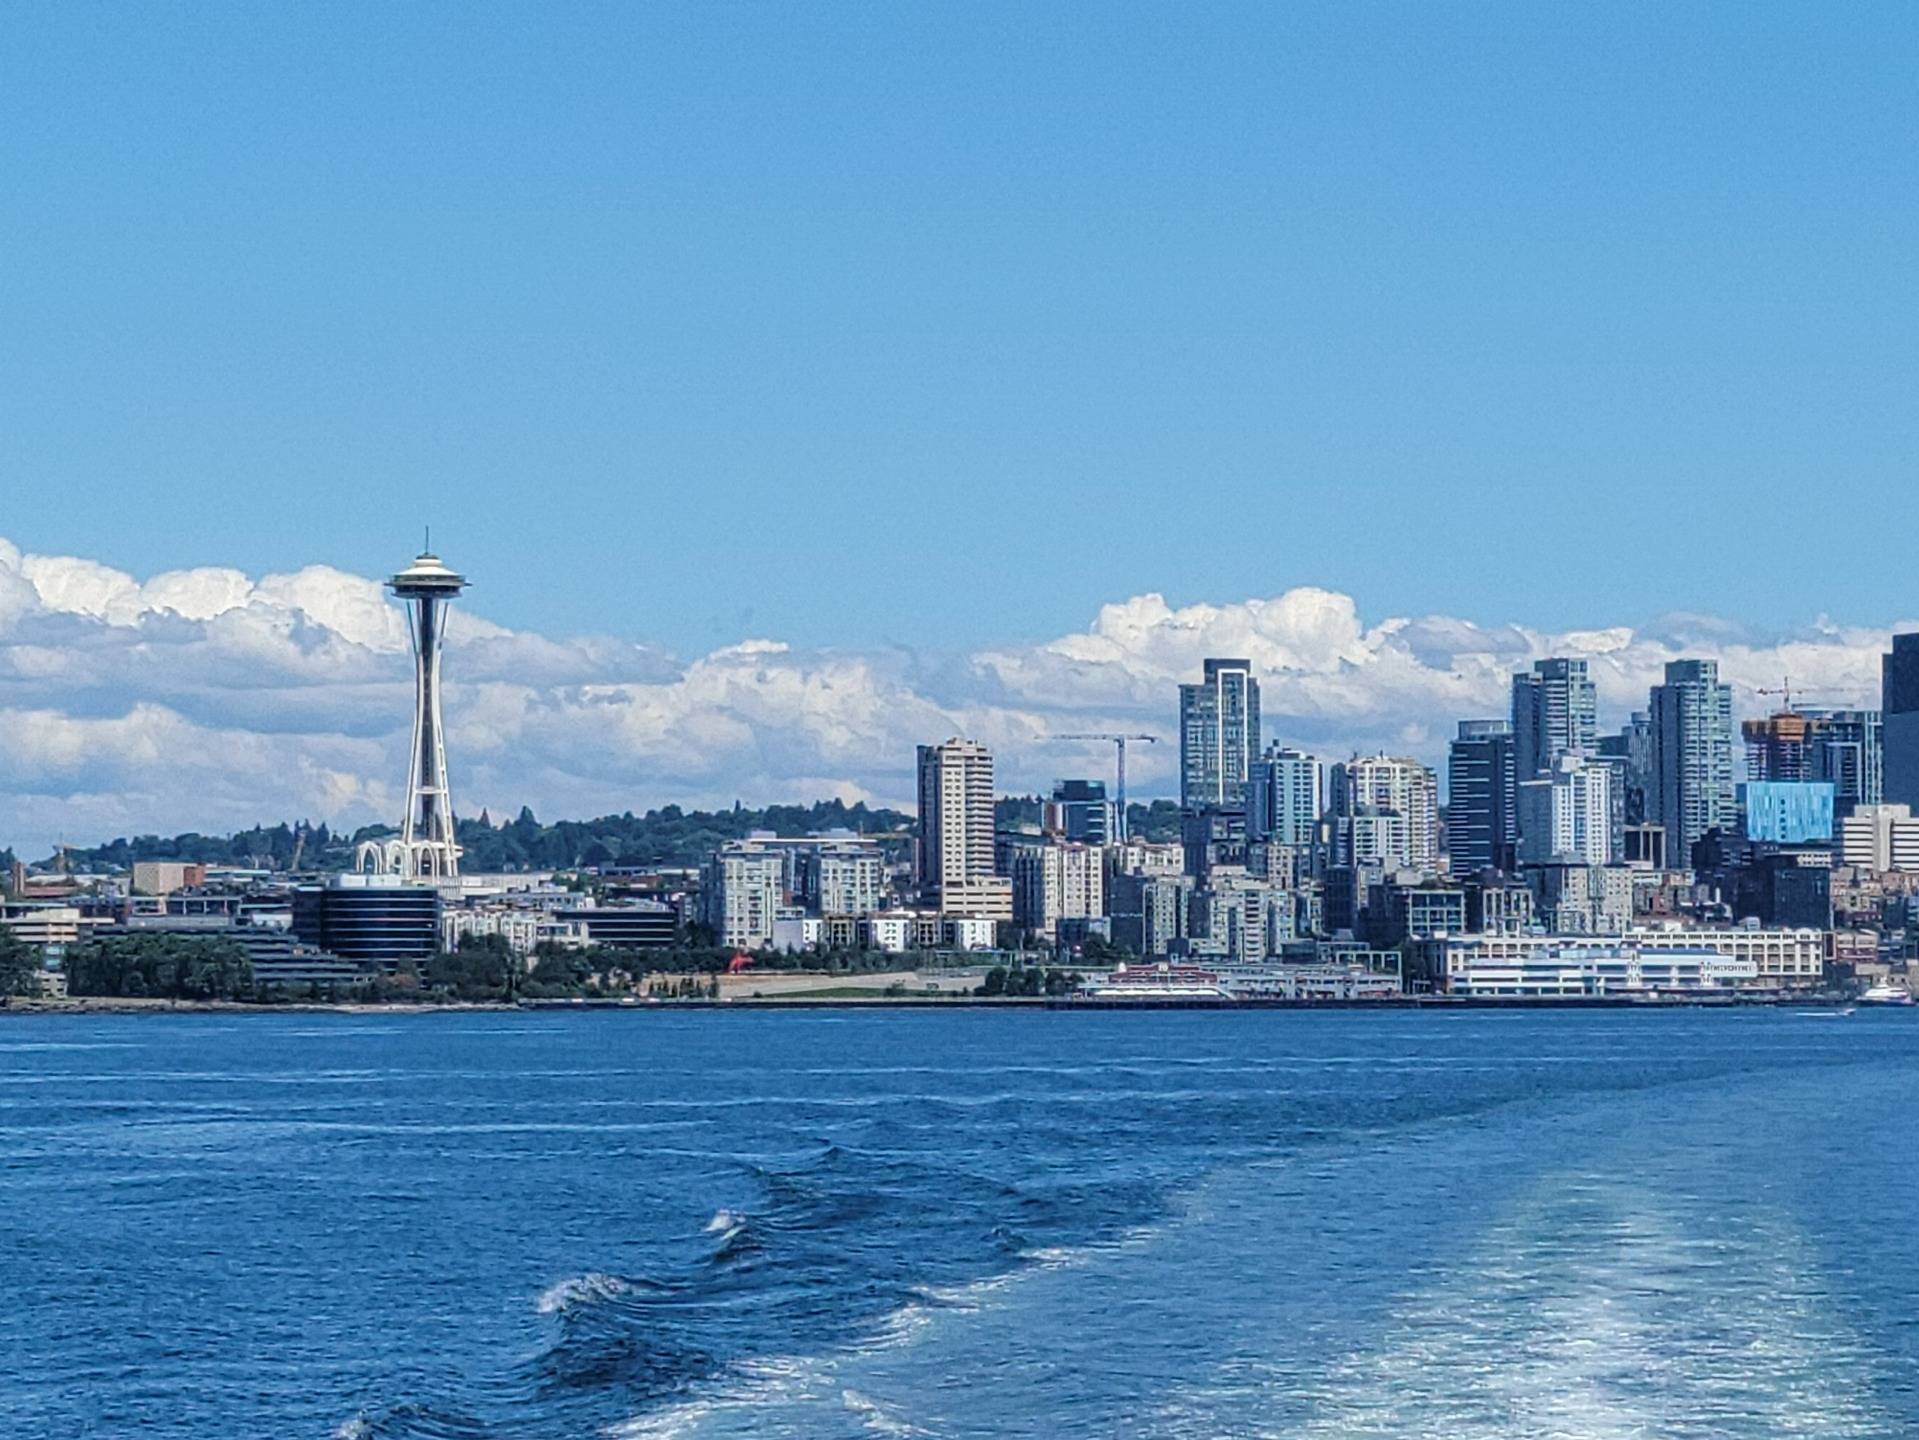 Space Needle and waterfront view from one of our many water ferry rides.